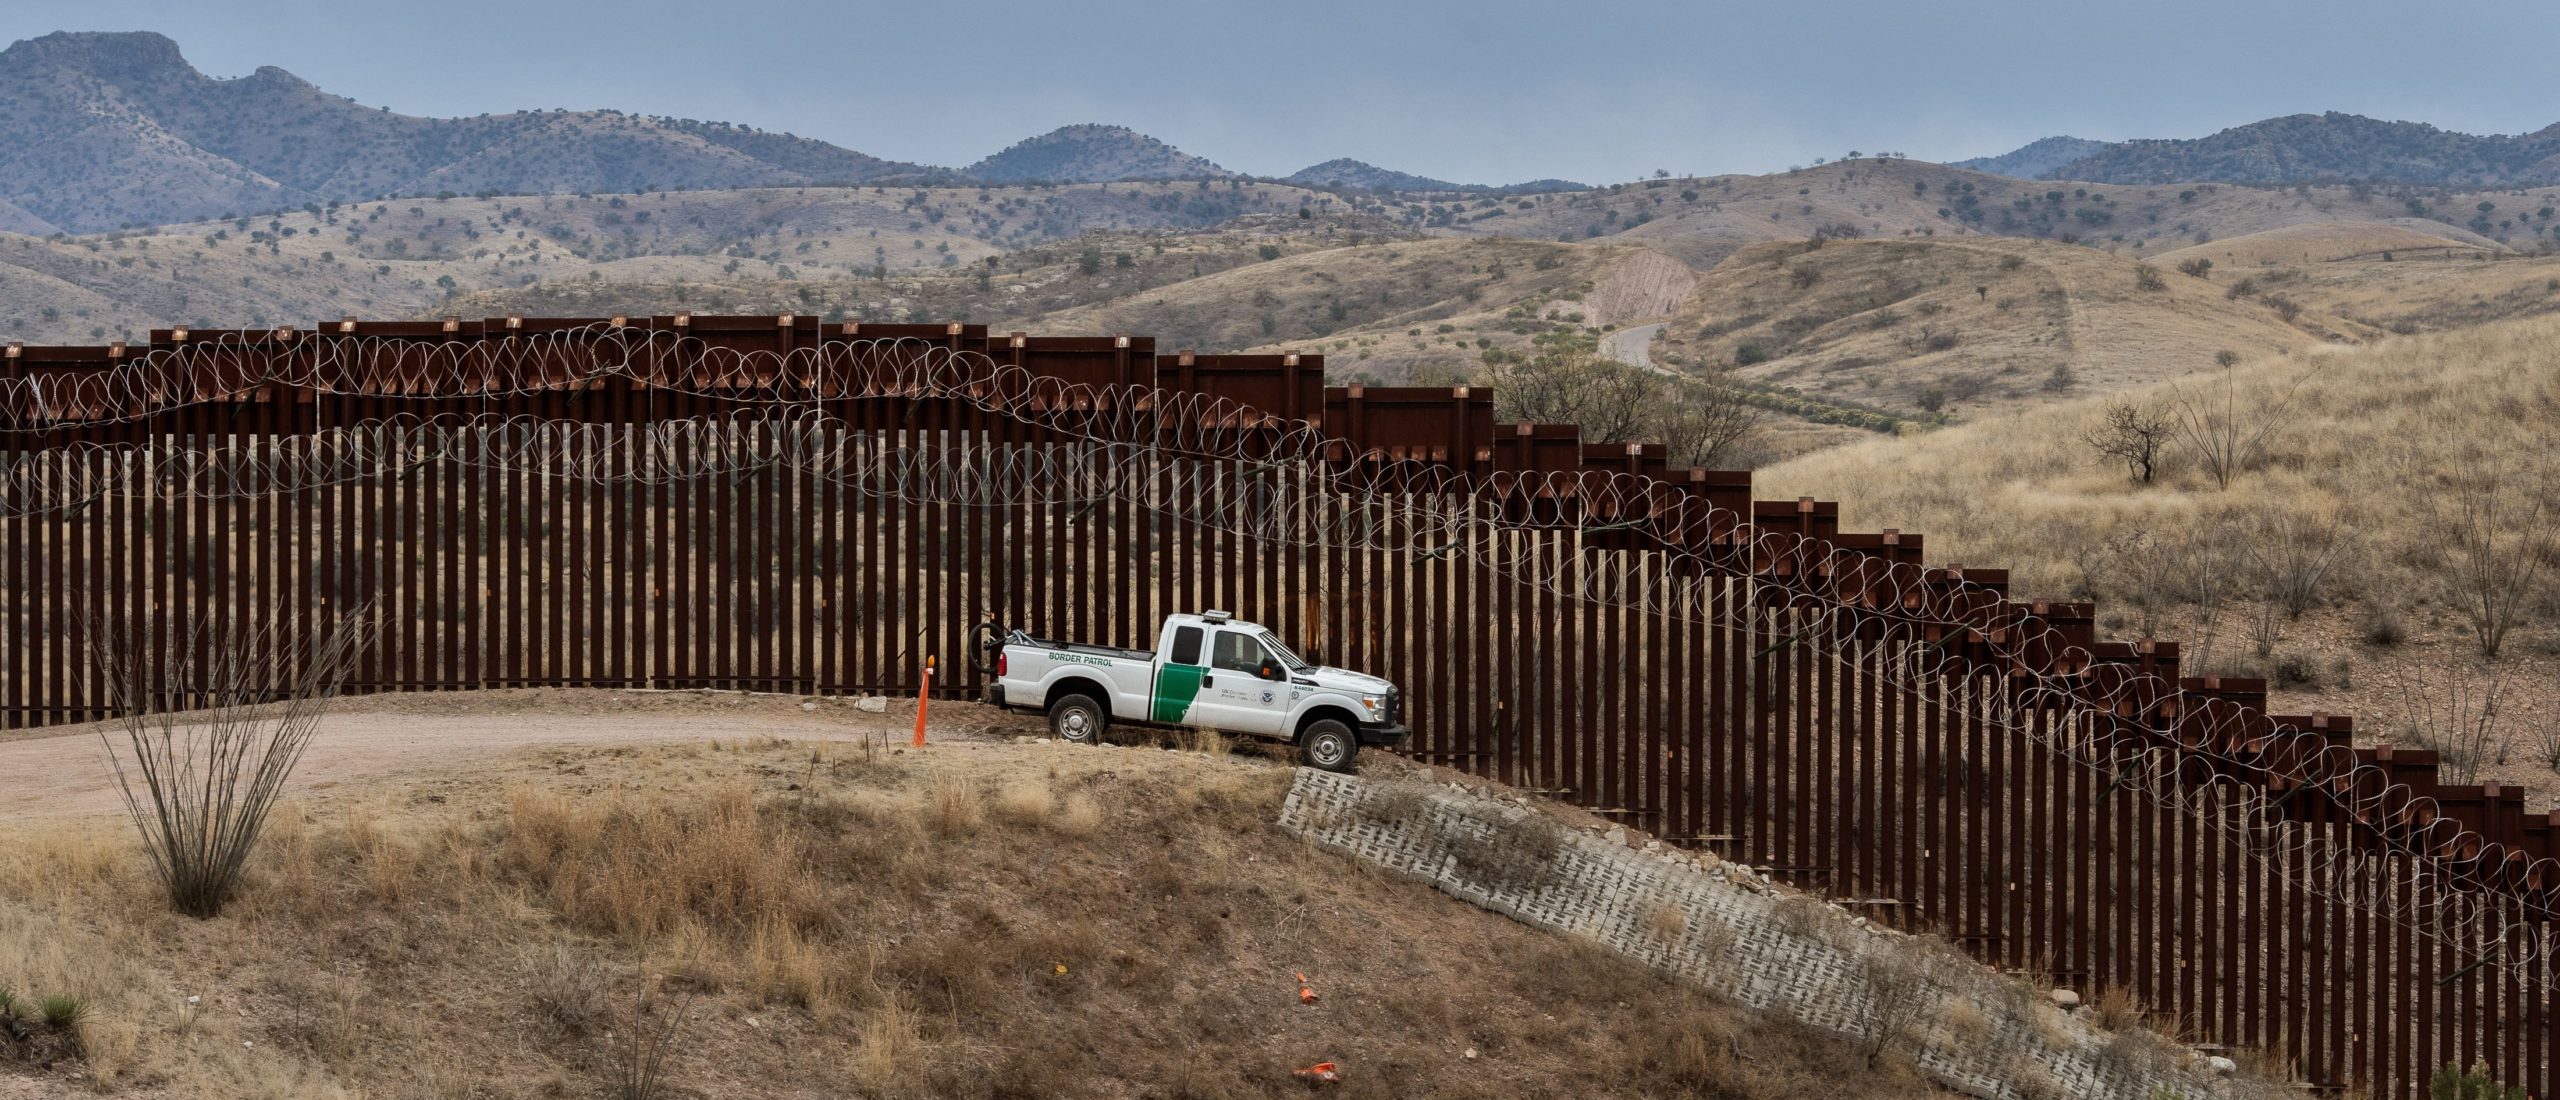 TOPSHOT - A Border Patrol officer sits inside his car as he guards the US/Mexico border fence, in Nogales, Arizona, on February 9, 2019. (Photo by Ariana Drehsler / AFP) (Photo by ARIANA DREHSLER/AFP via Getty Images)